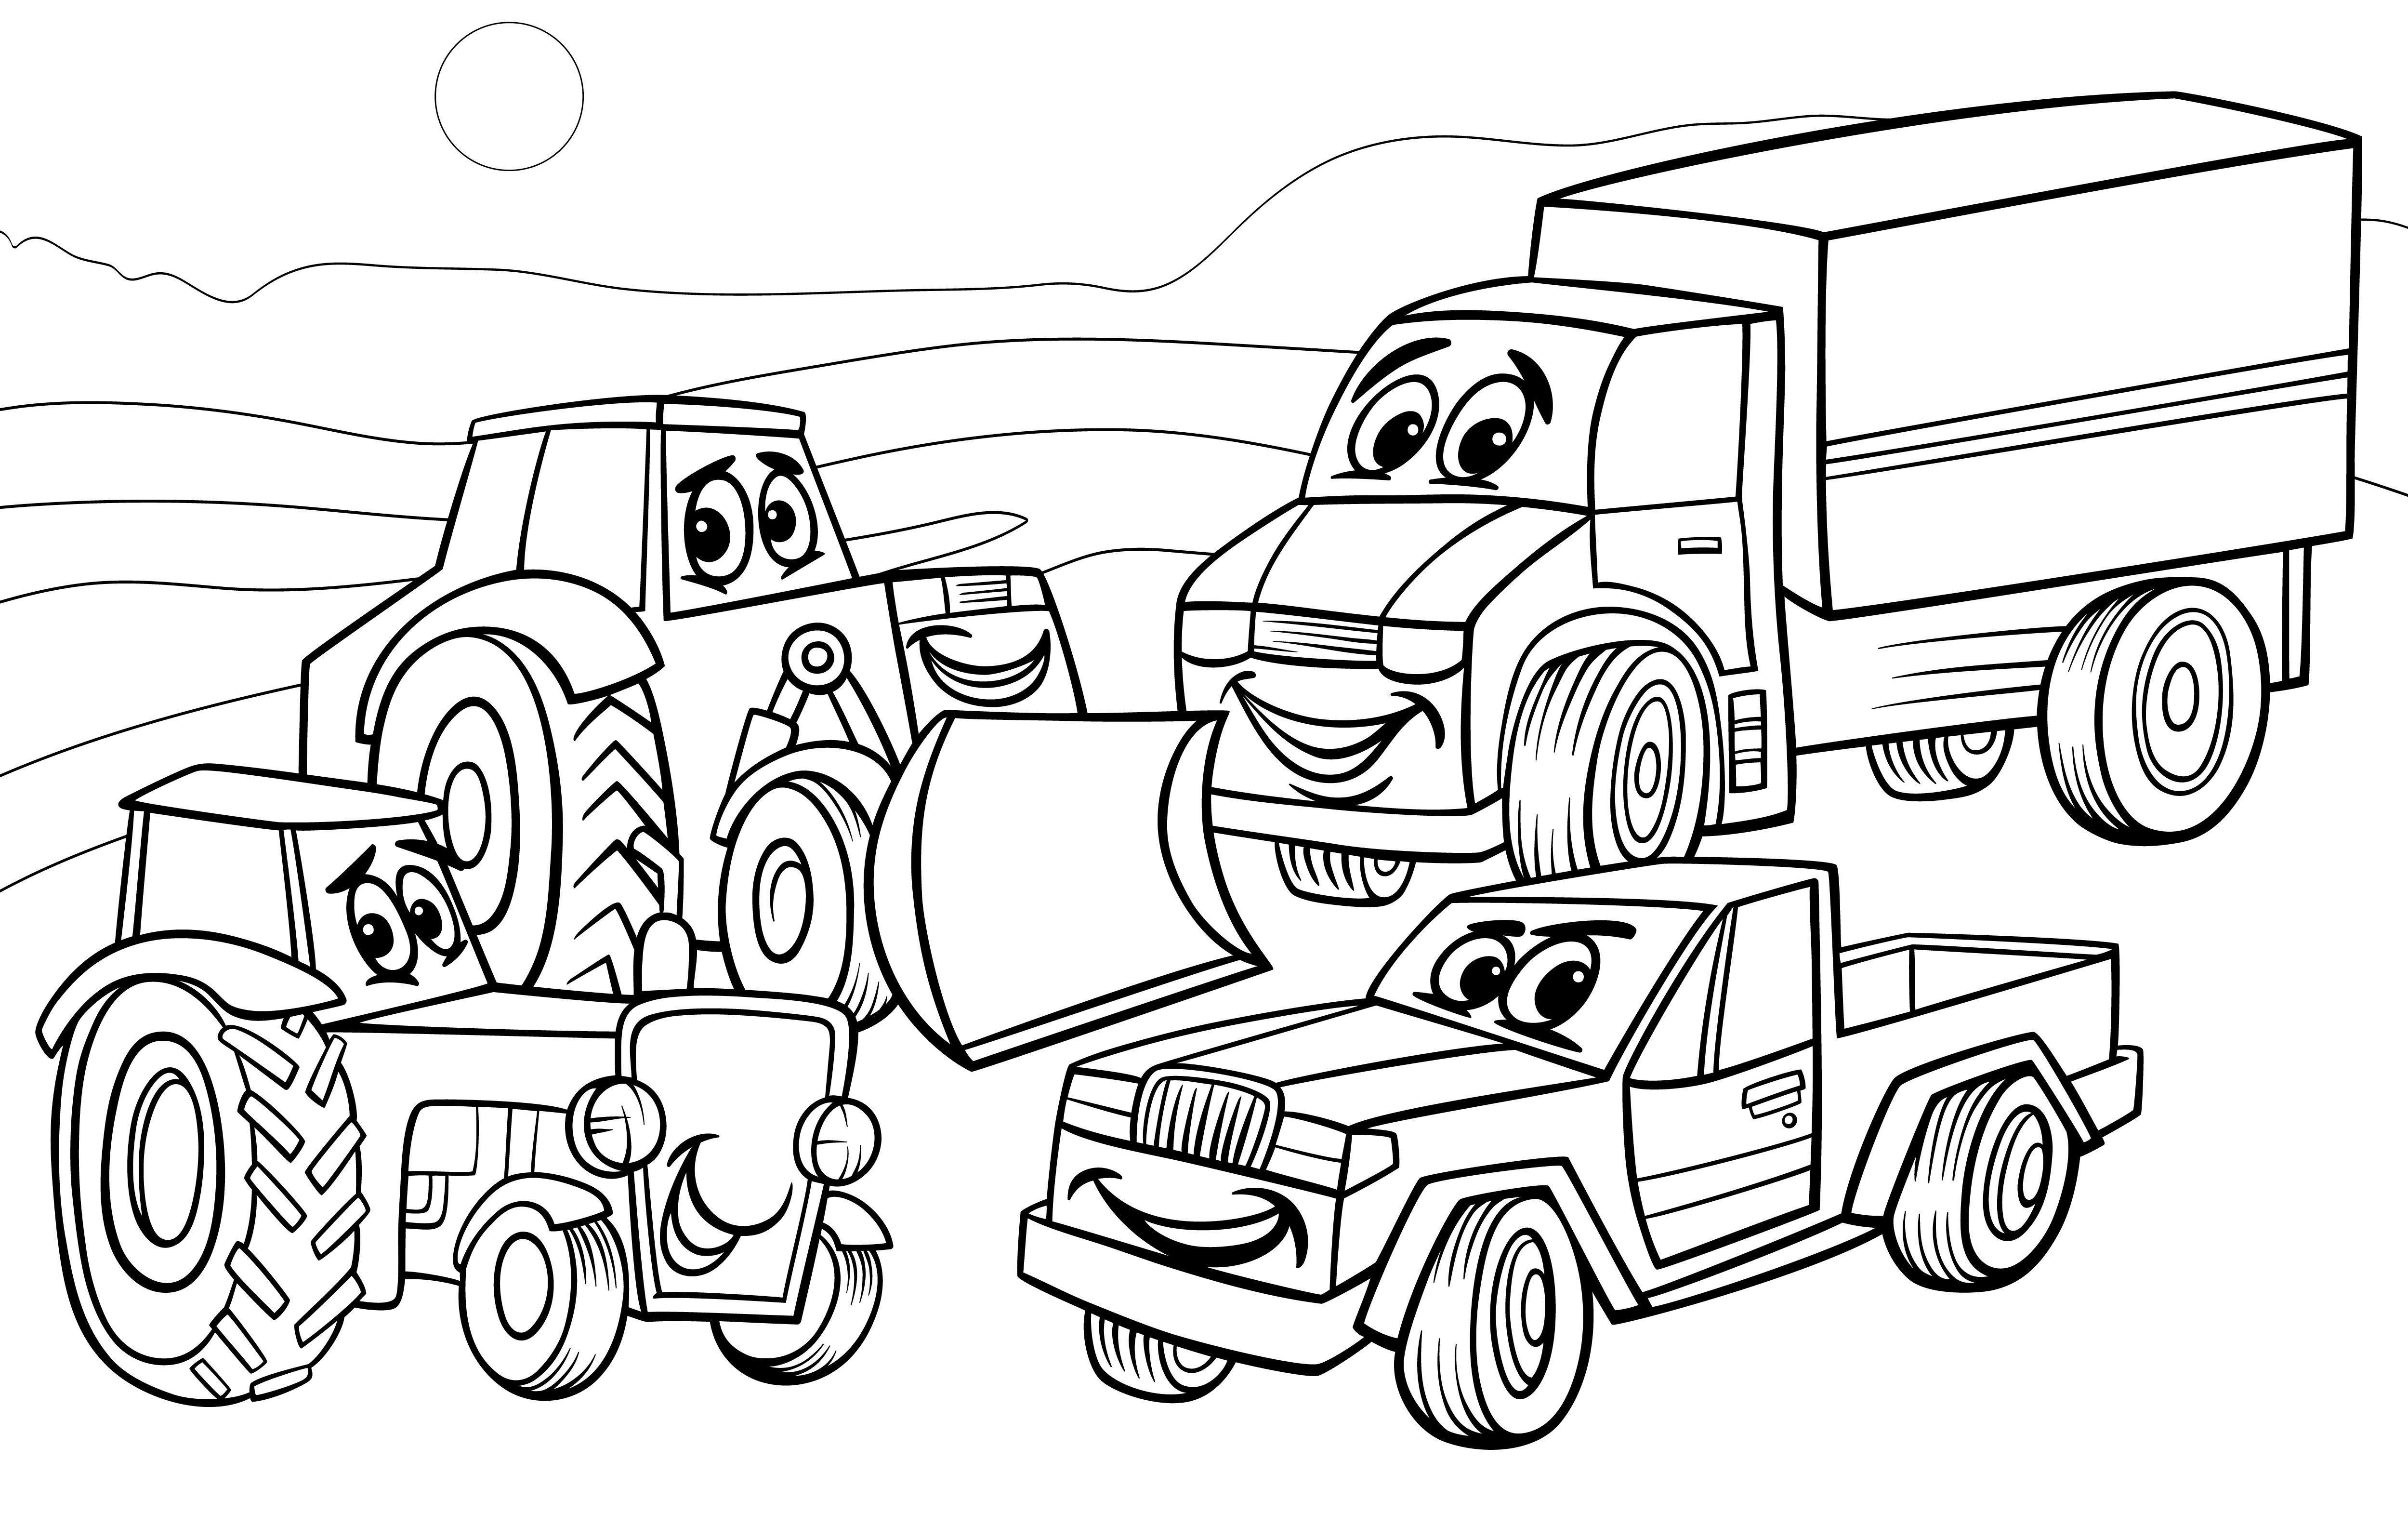 Home Coloring Pages For Boys Sumper
 Summer Activities Coloring Page for Boys Country Home